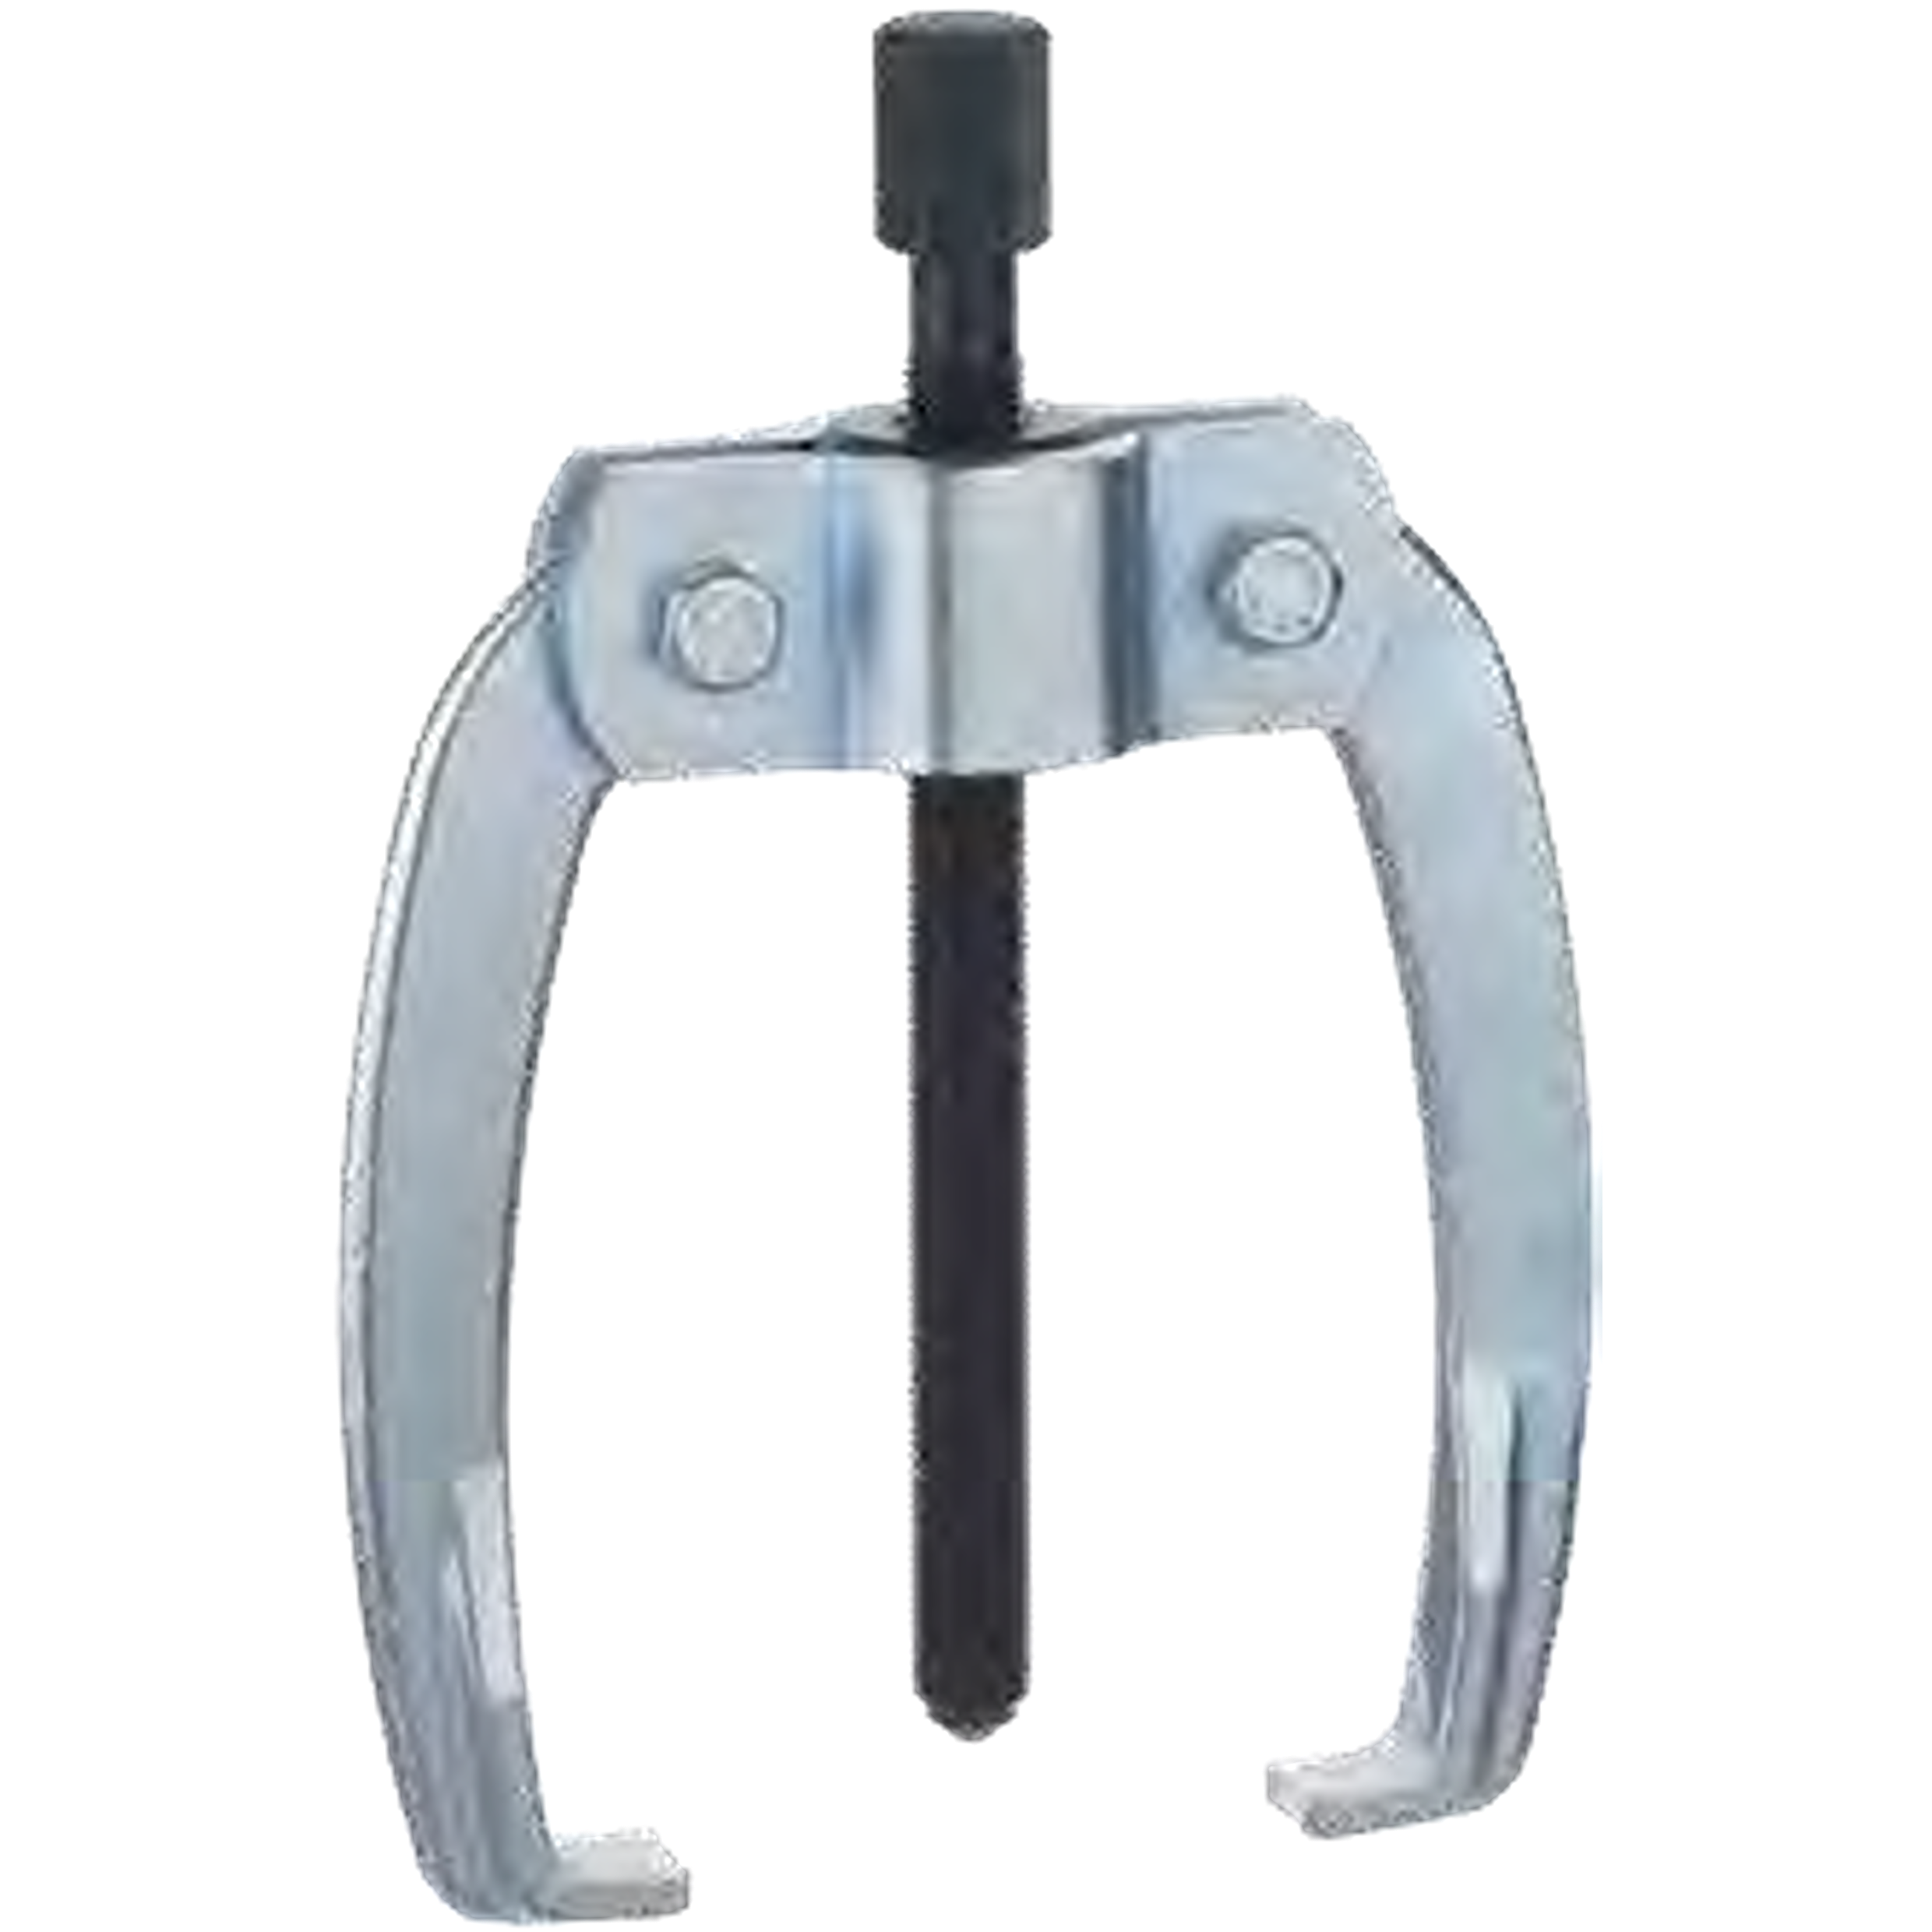 NEXUS 144 Universal-Puller Without Tee-Handle, 3-Arms - Premium Mechanical Pullers from NEXUS - Shop now at Yew Aik.